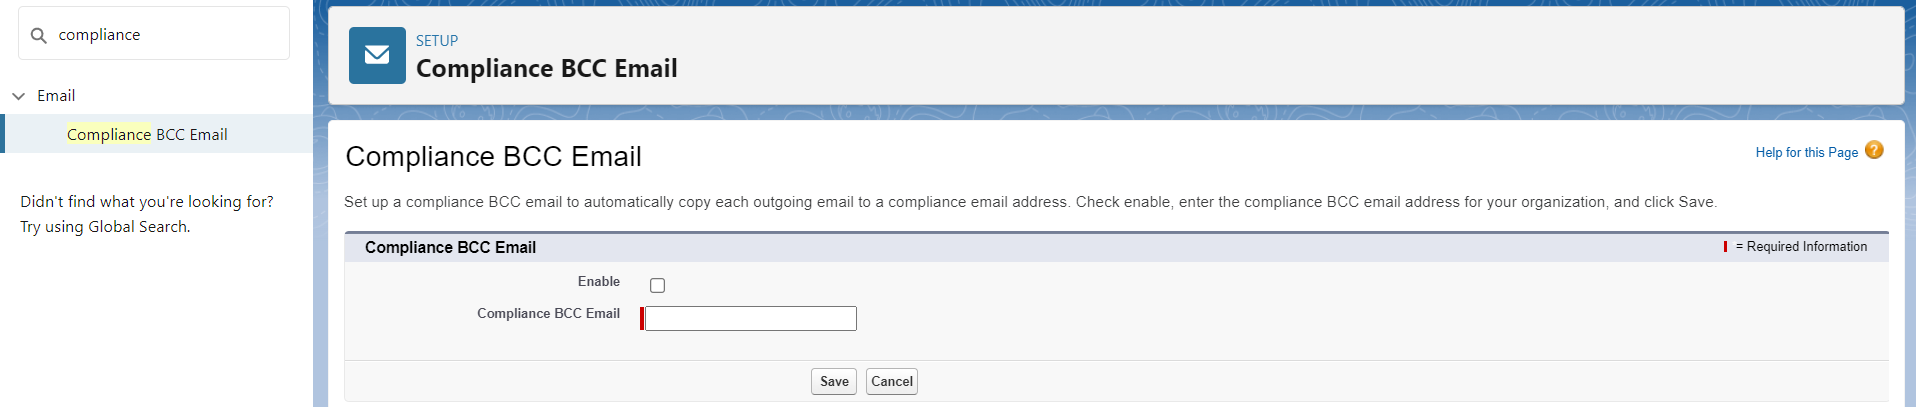 Compliance BCC Email